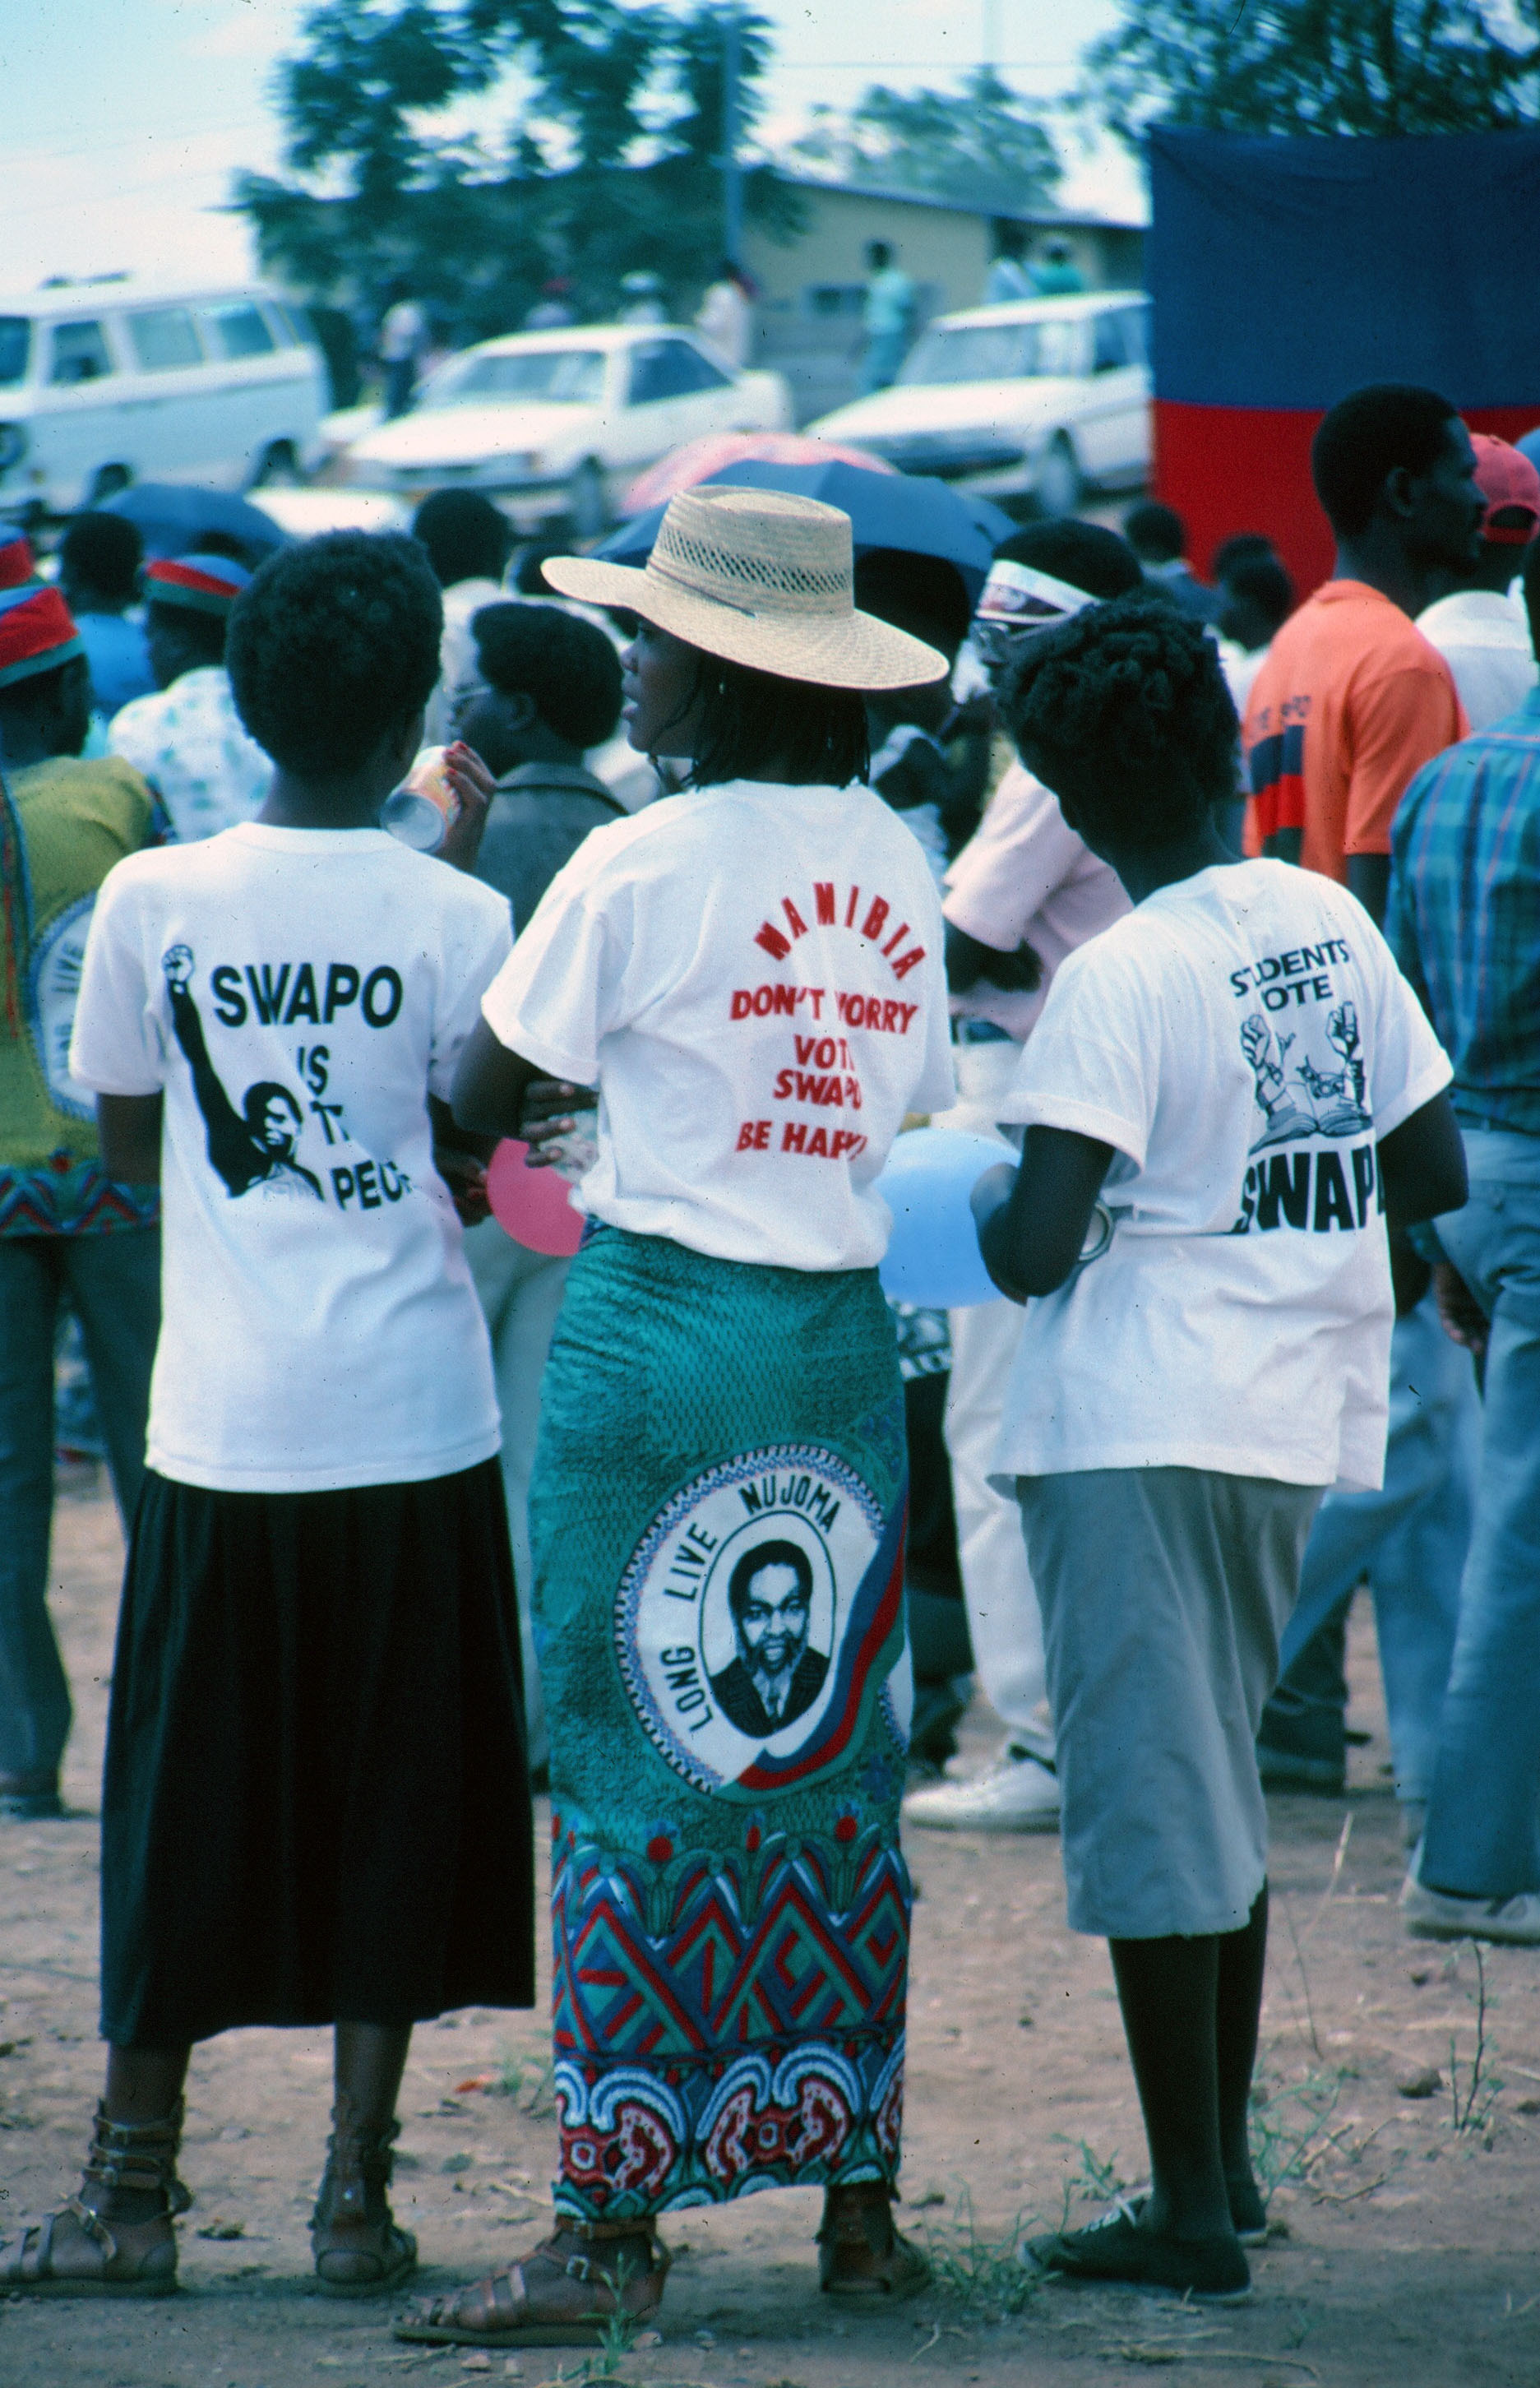 Clothes showing support for SWAPO 